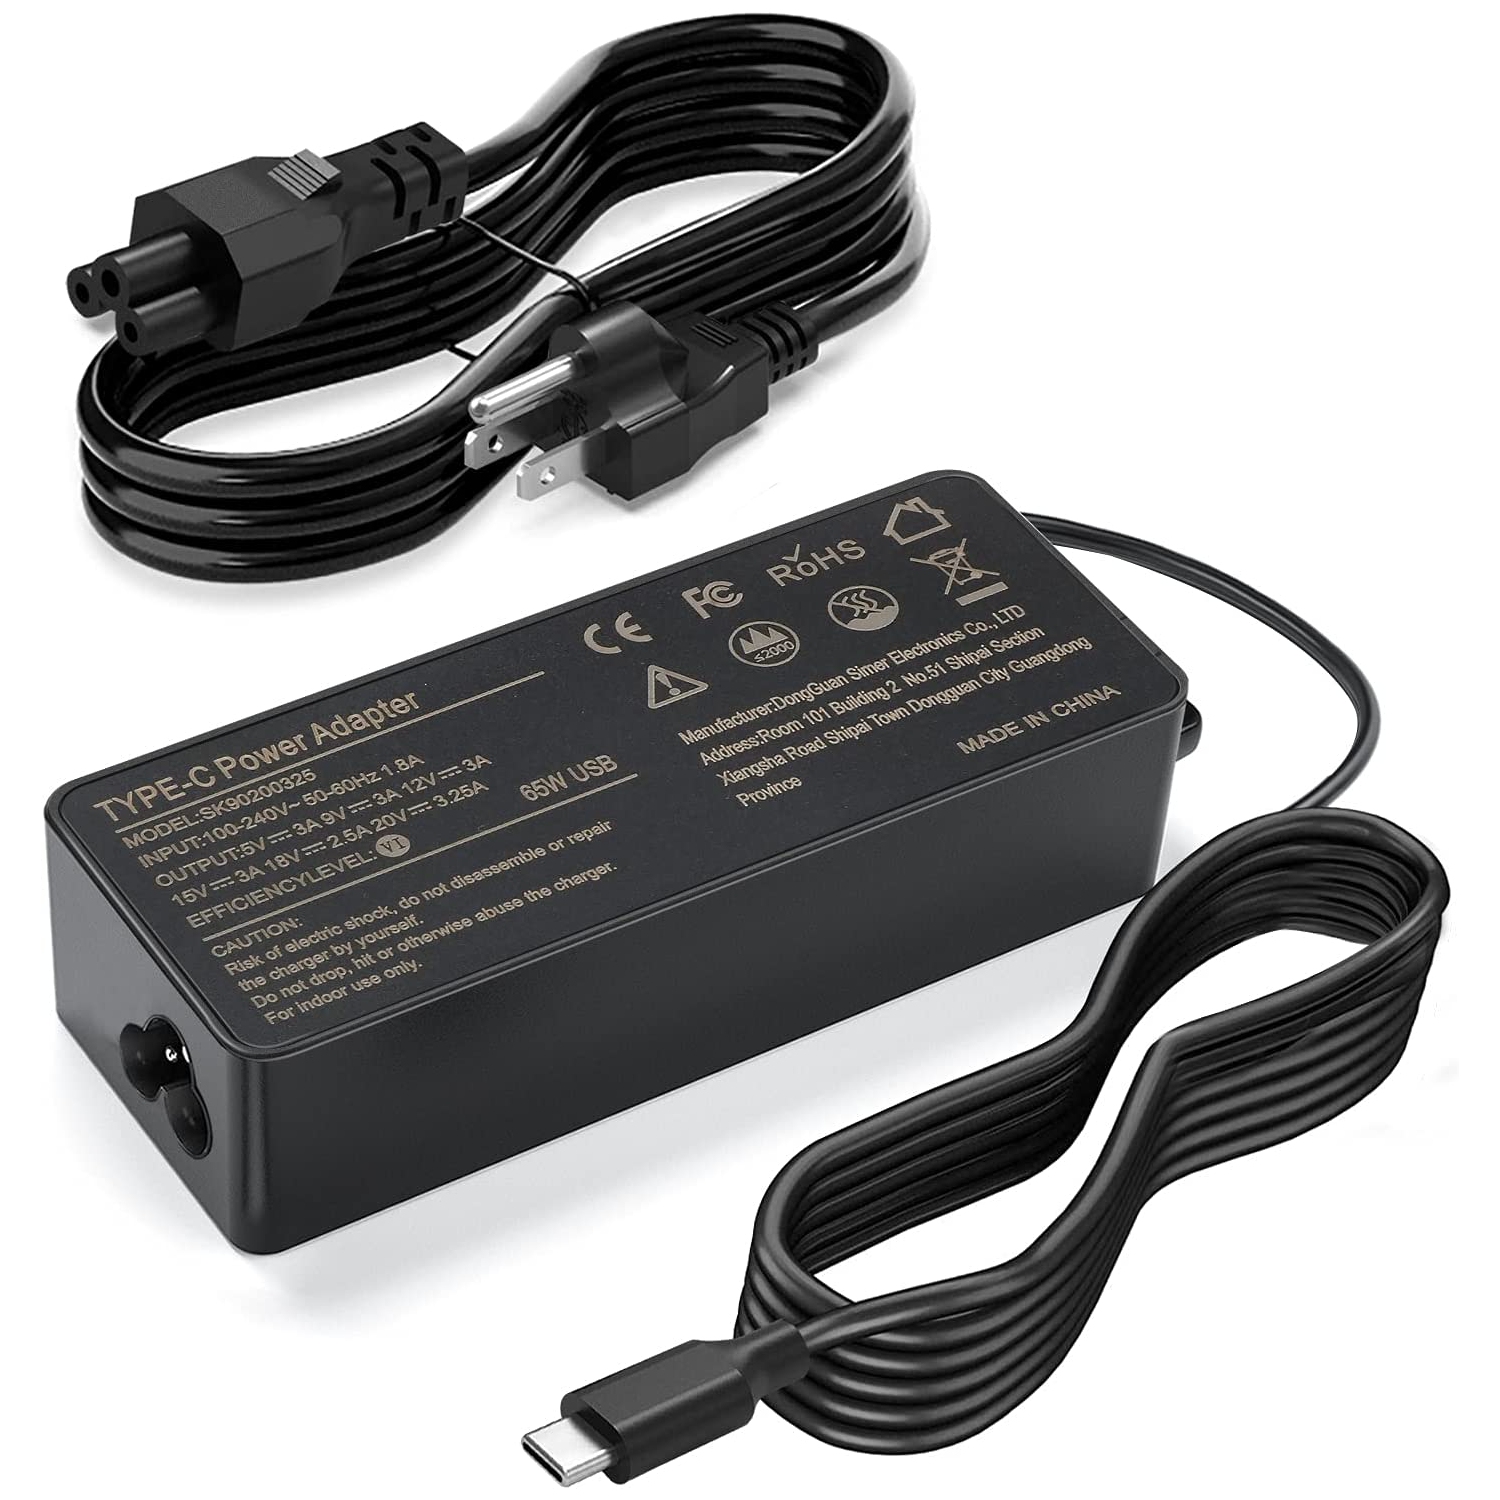 HP USB-C 65W Laptop Charger - HP Store Canada